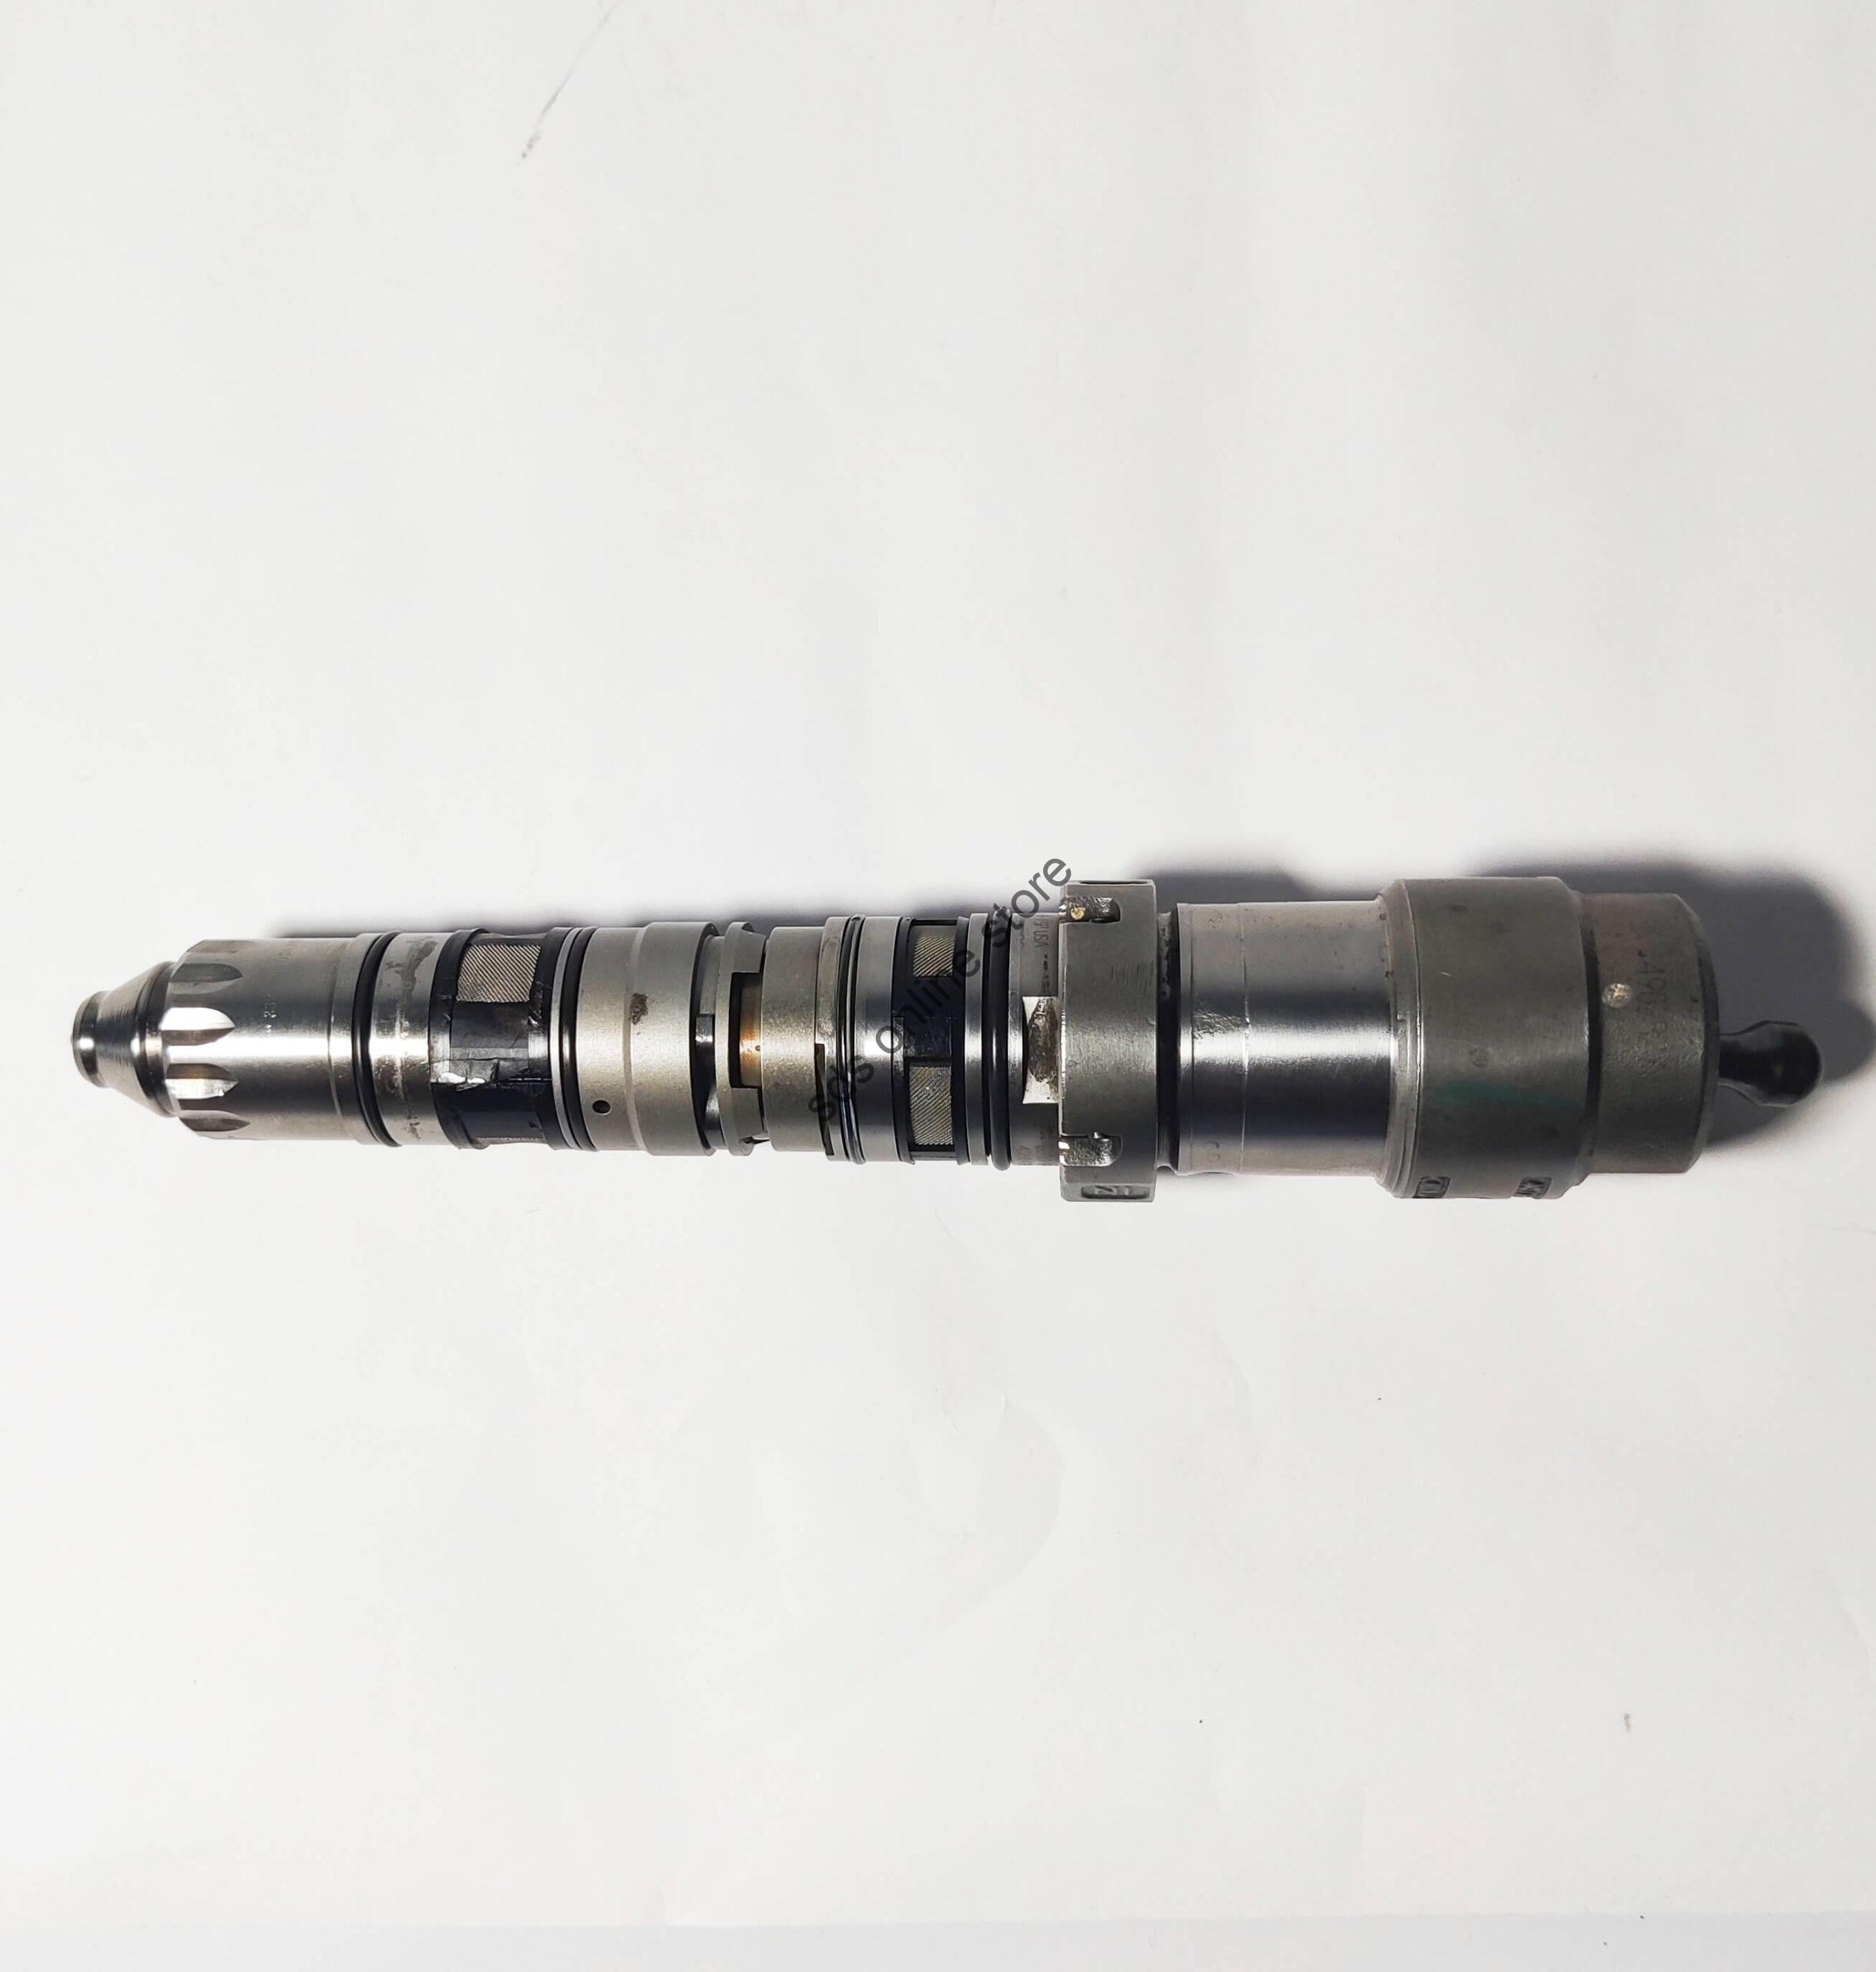 CUMMINS RECON INJECTOR ASSEMBLY